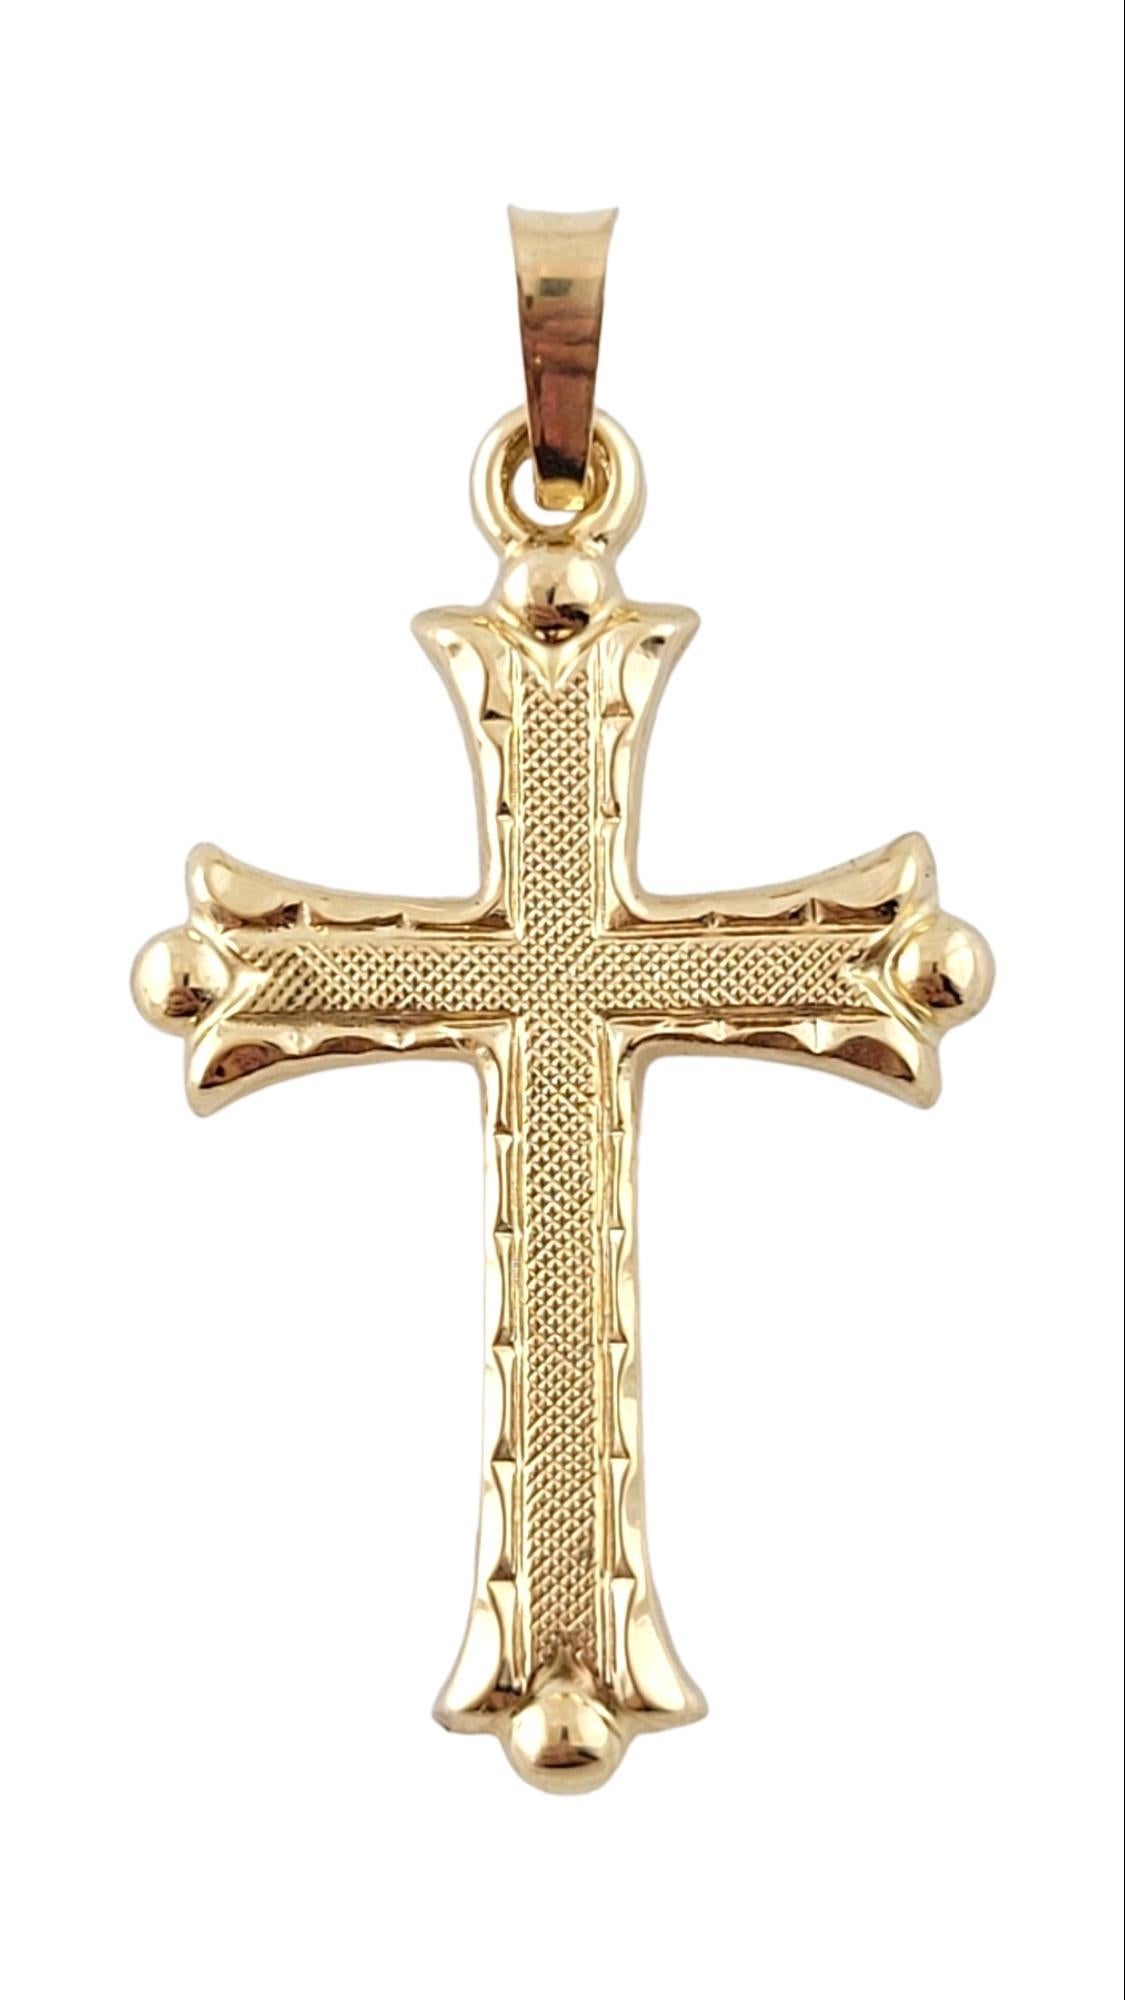 14K Yellow Gold Cross Pendant

This beautiful cross pendant is crafted from 14K yellow gold with gorgeous detailing!

Size: 28.4mm X 17.6mm X 1.8mm
Length w/ bail: 32.8mm

Weight: 1.04 g / 0.7 dwt

Hallmark: 14K

Very good condition, professionally